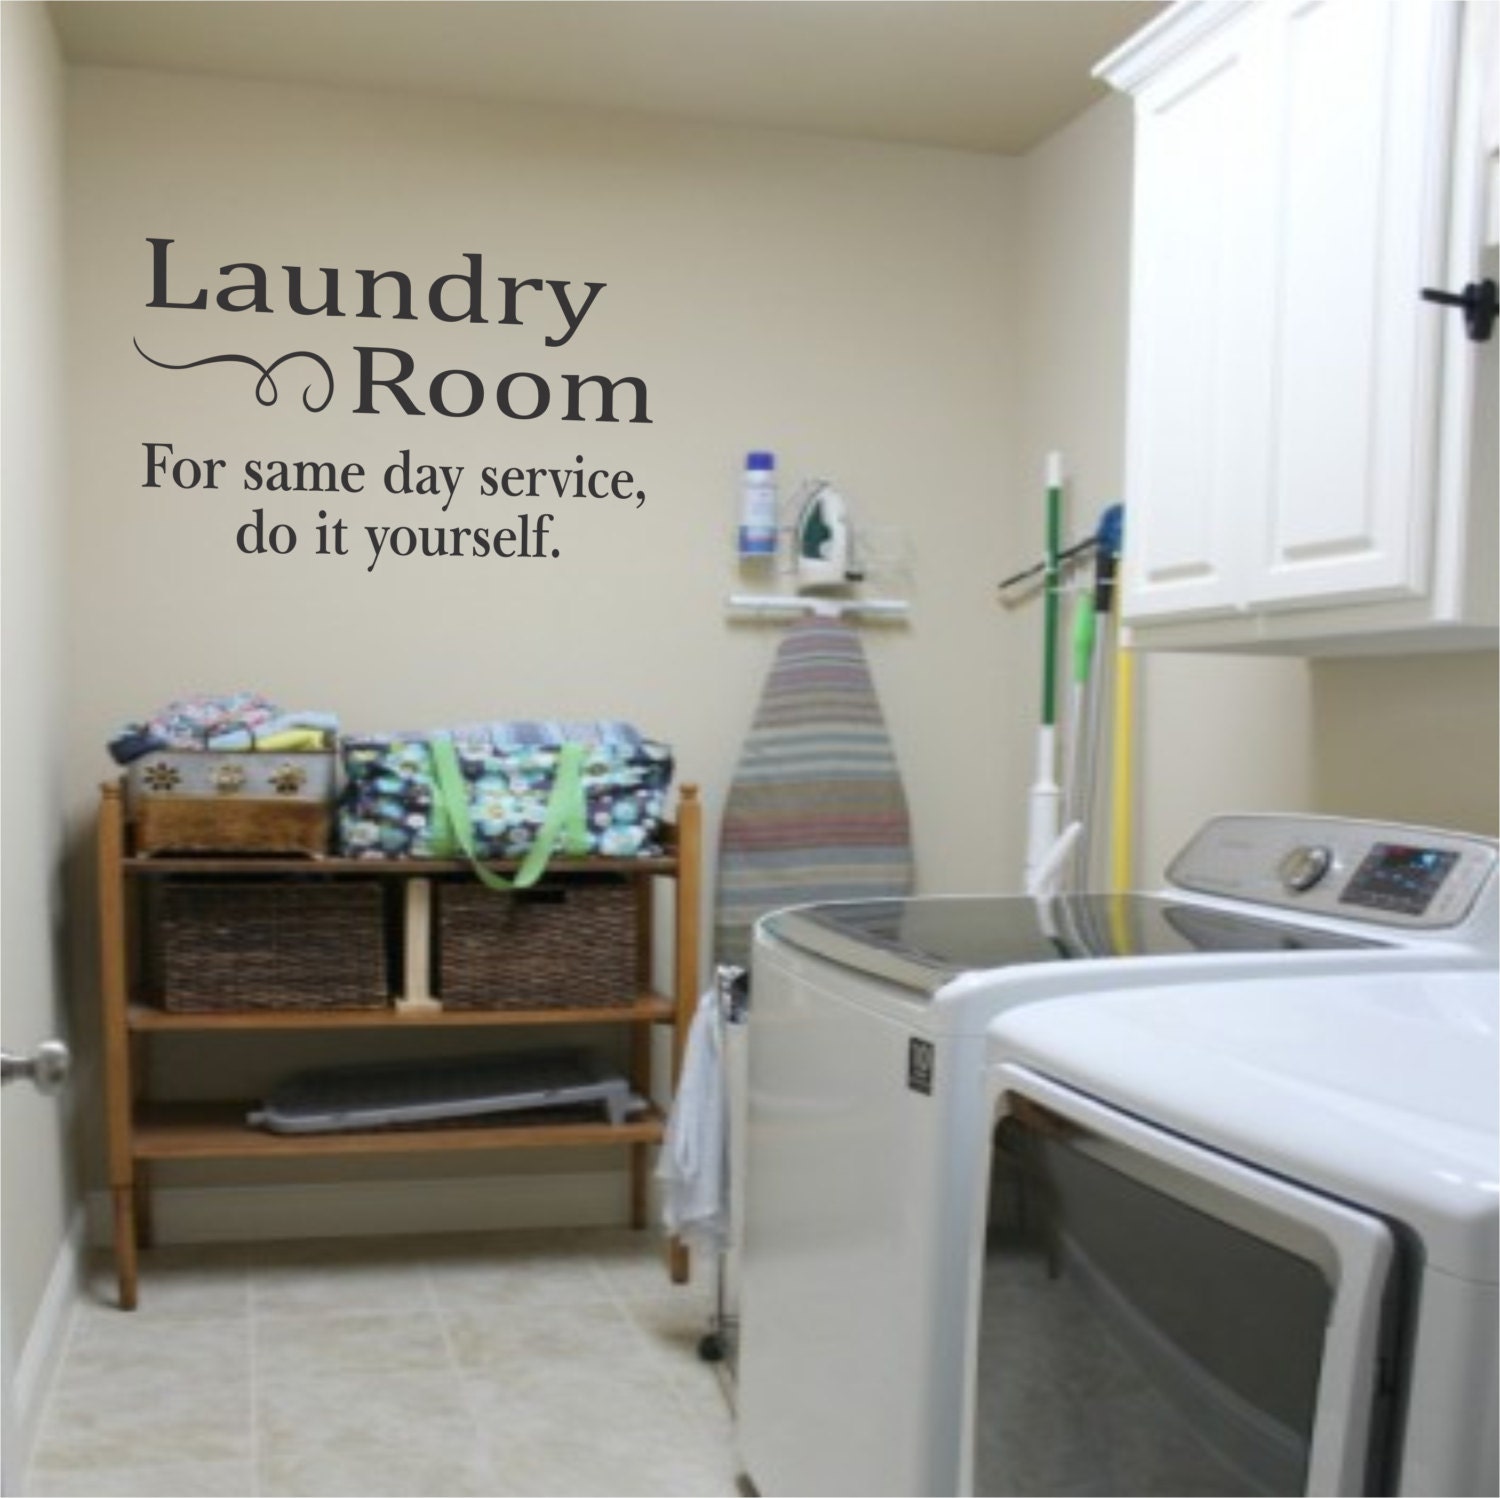 Laundry Room Wall Decal Funny Laundry Room by XcaliburInkGraphX